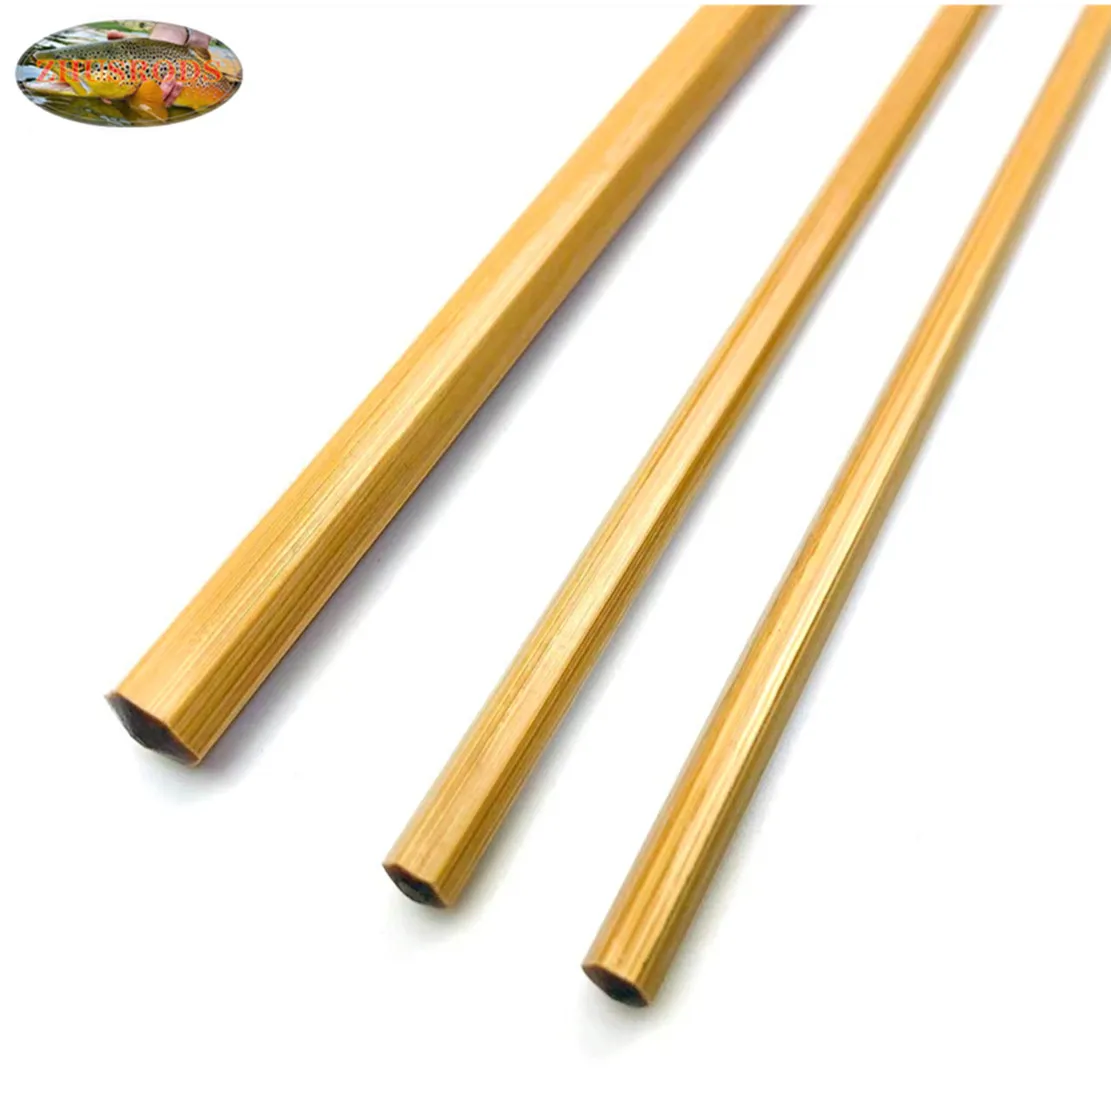 ZHUSRODS Bamboo Fly Rod Blanks 2 Section 2 Tip (6'6-8'0) And Nickel  Silver Ferrule / Handmade Fly Fishing Rod Blanks - AliExpress